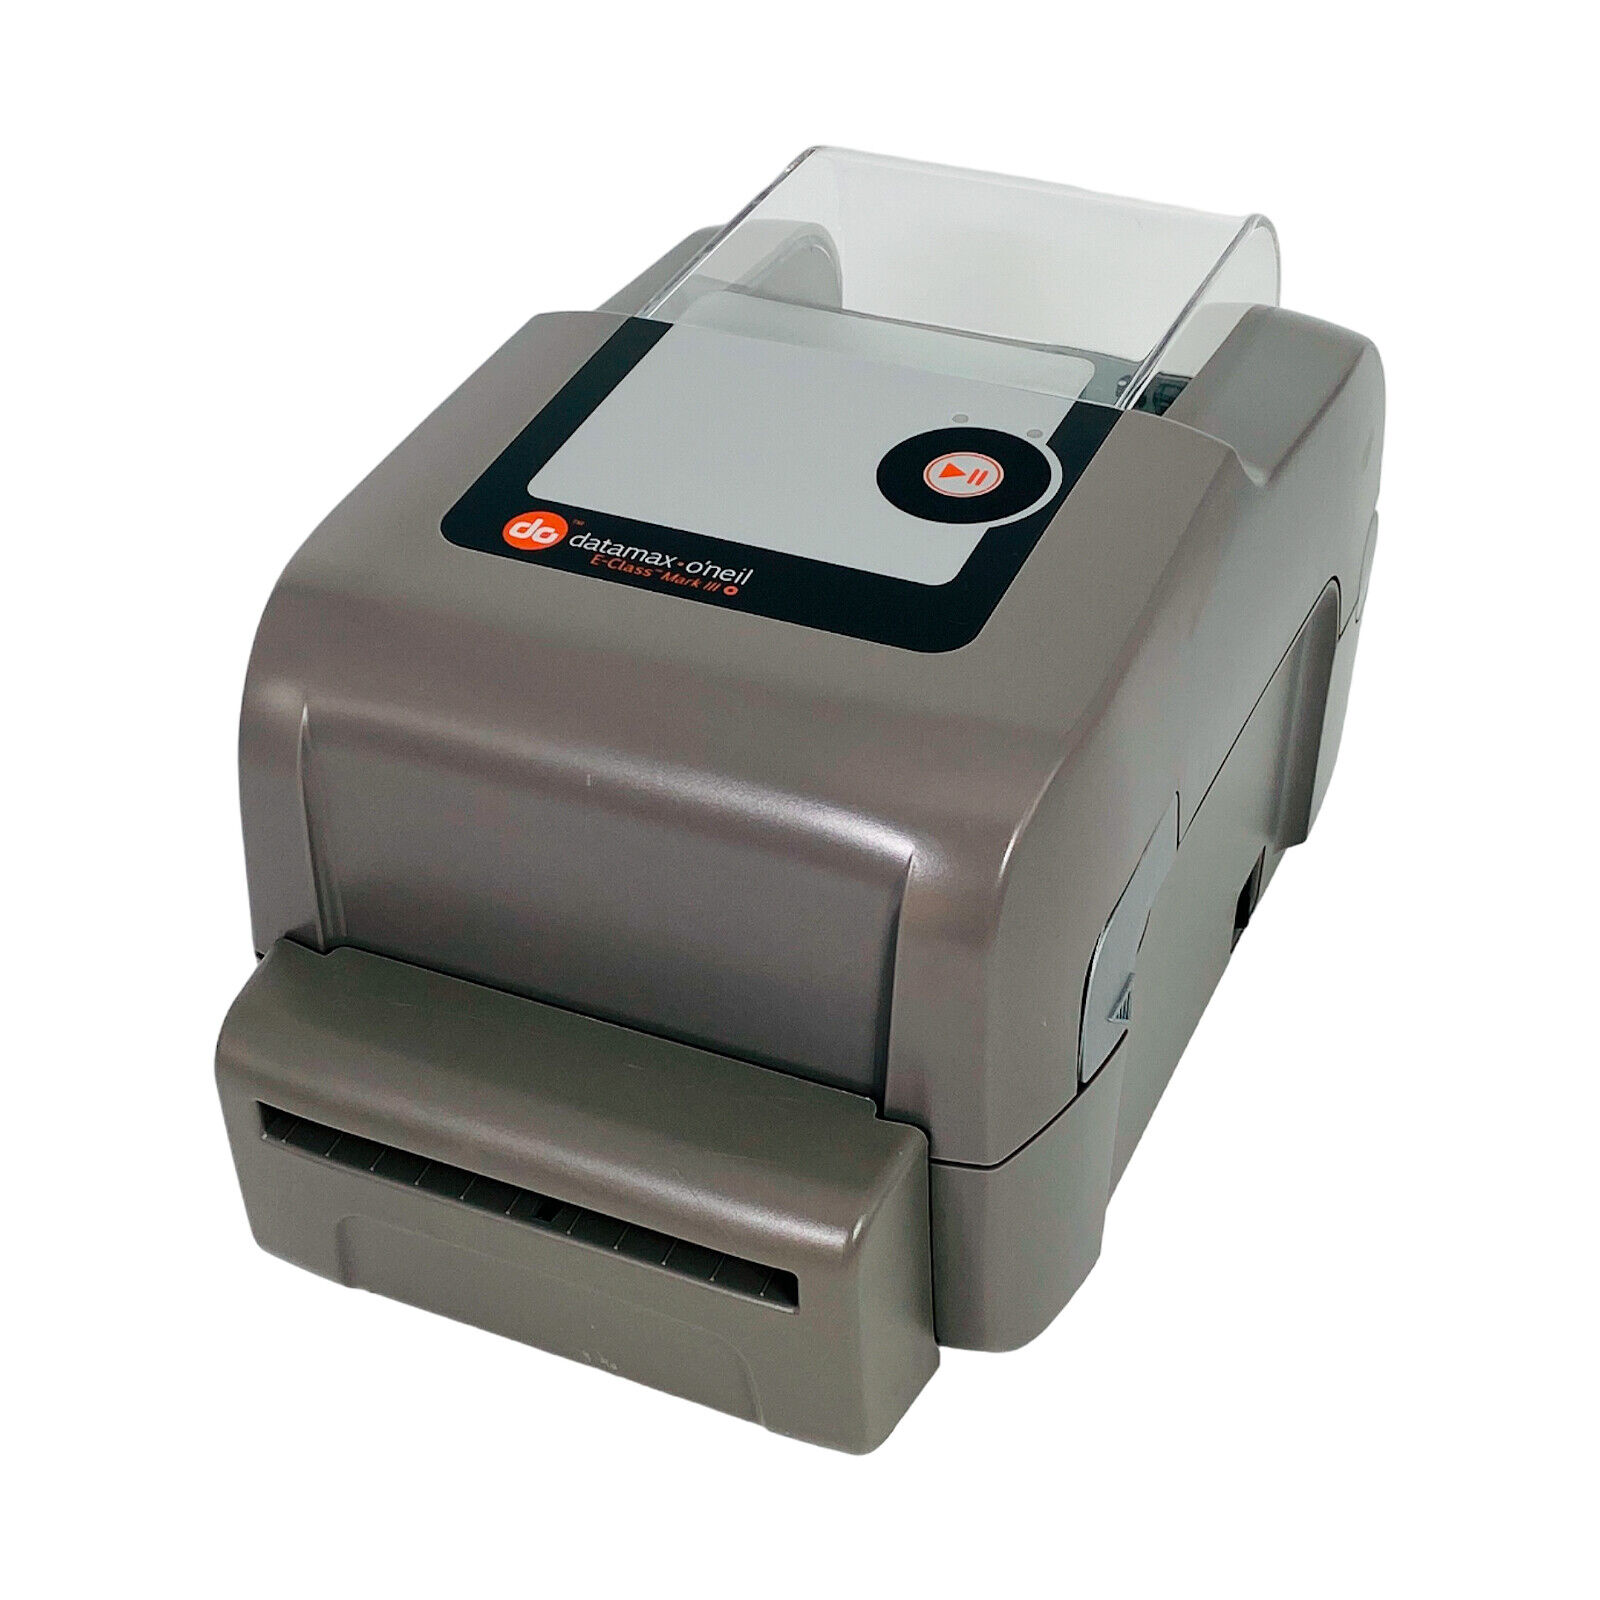 GOOD WORKING🔥Datamax E-4205A Mark III Direct Thermal Label Printer with Cutter